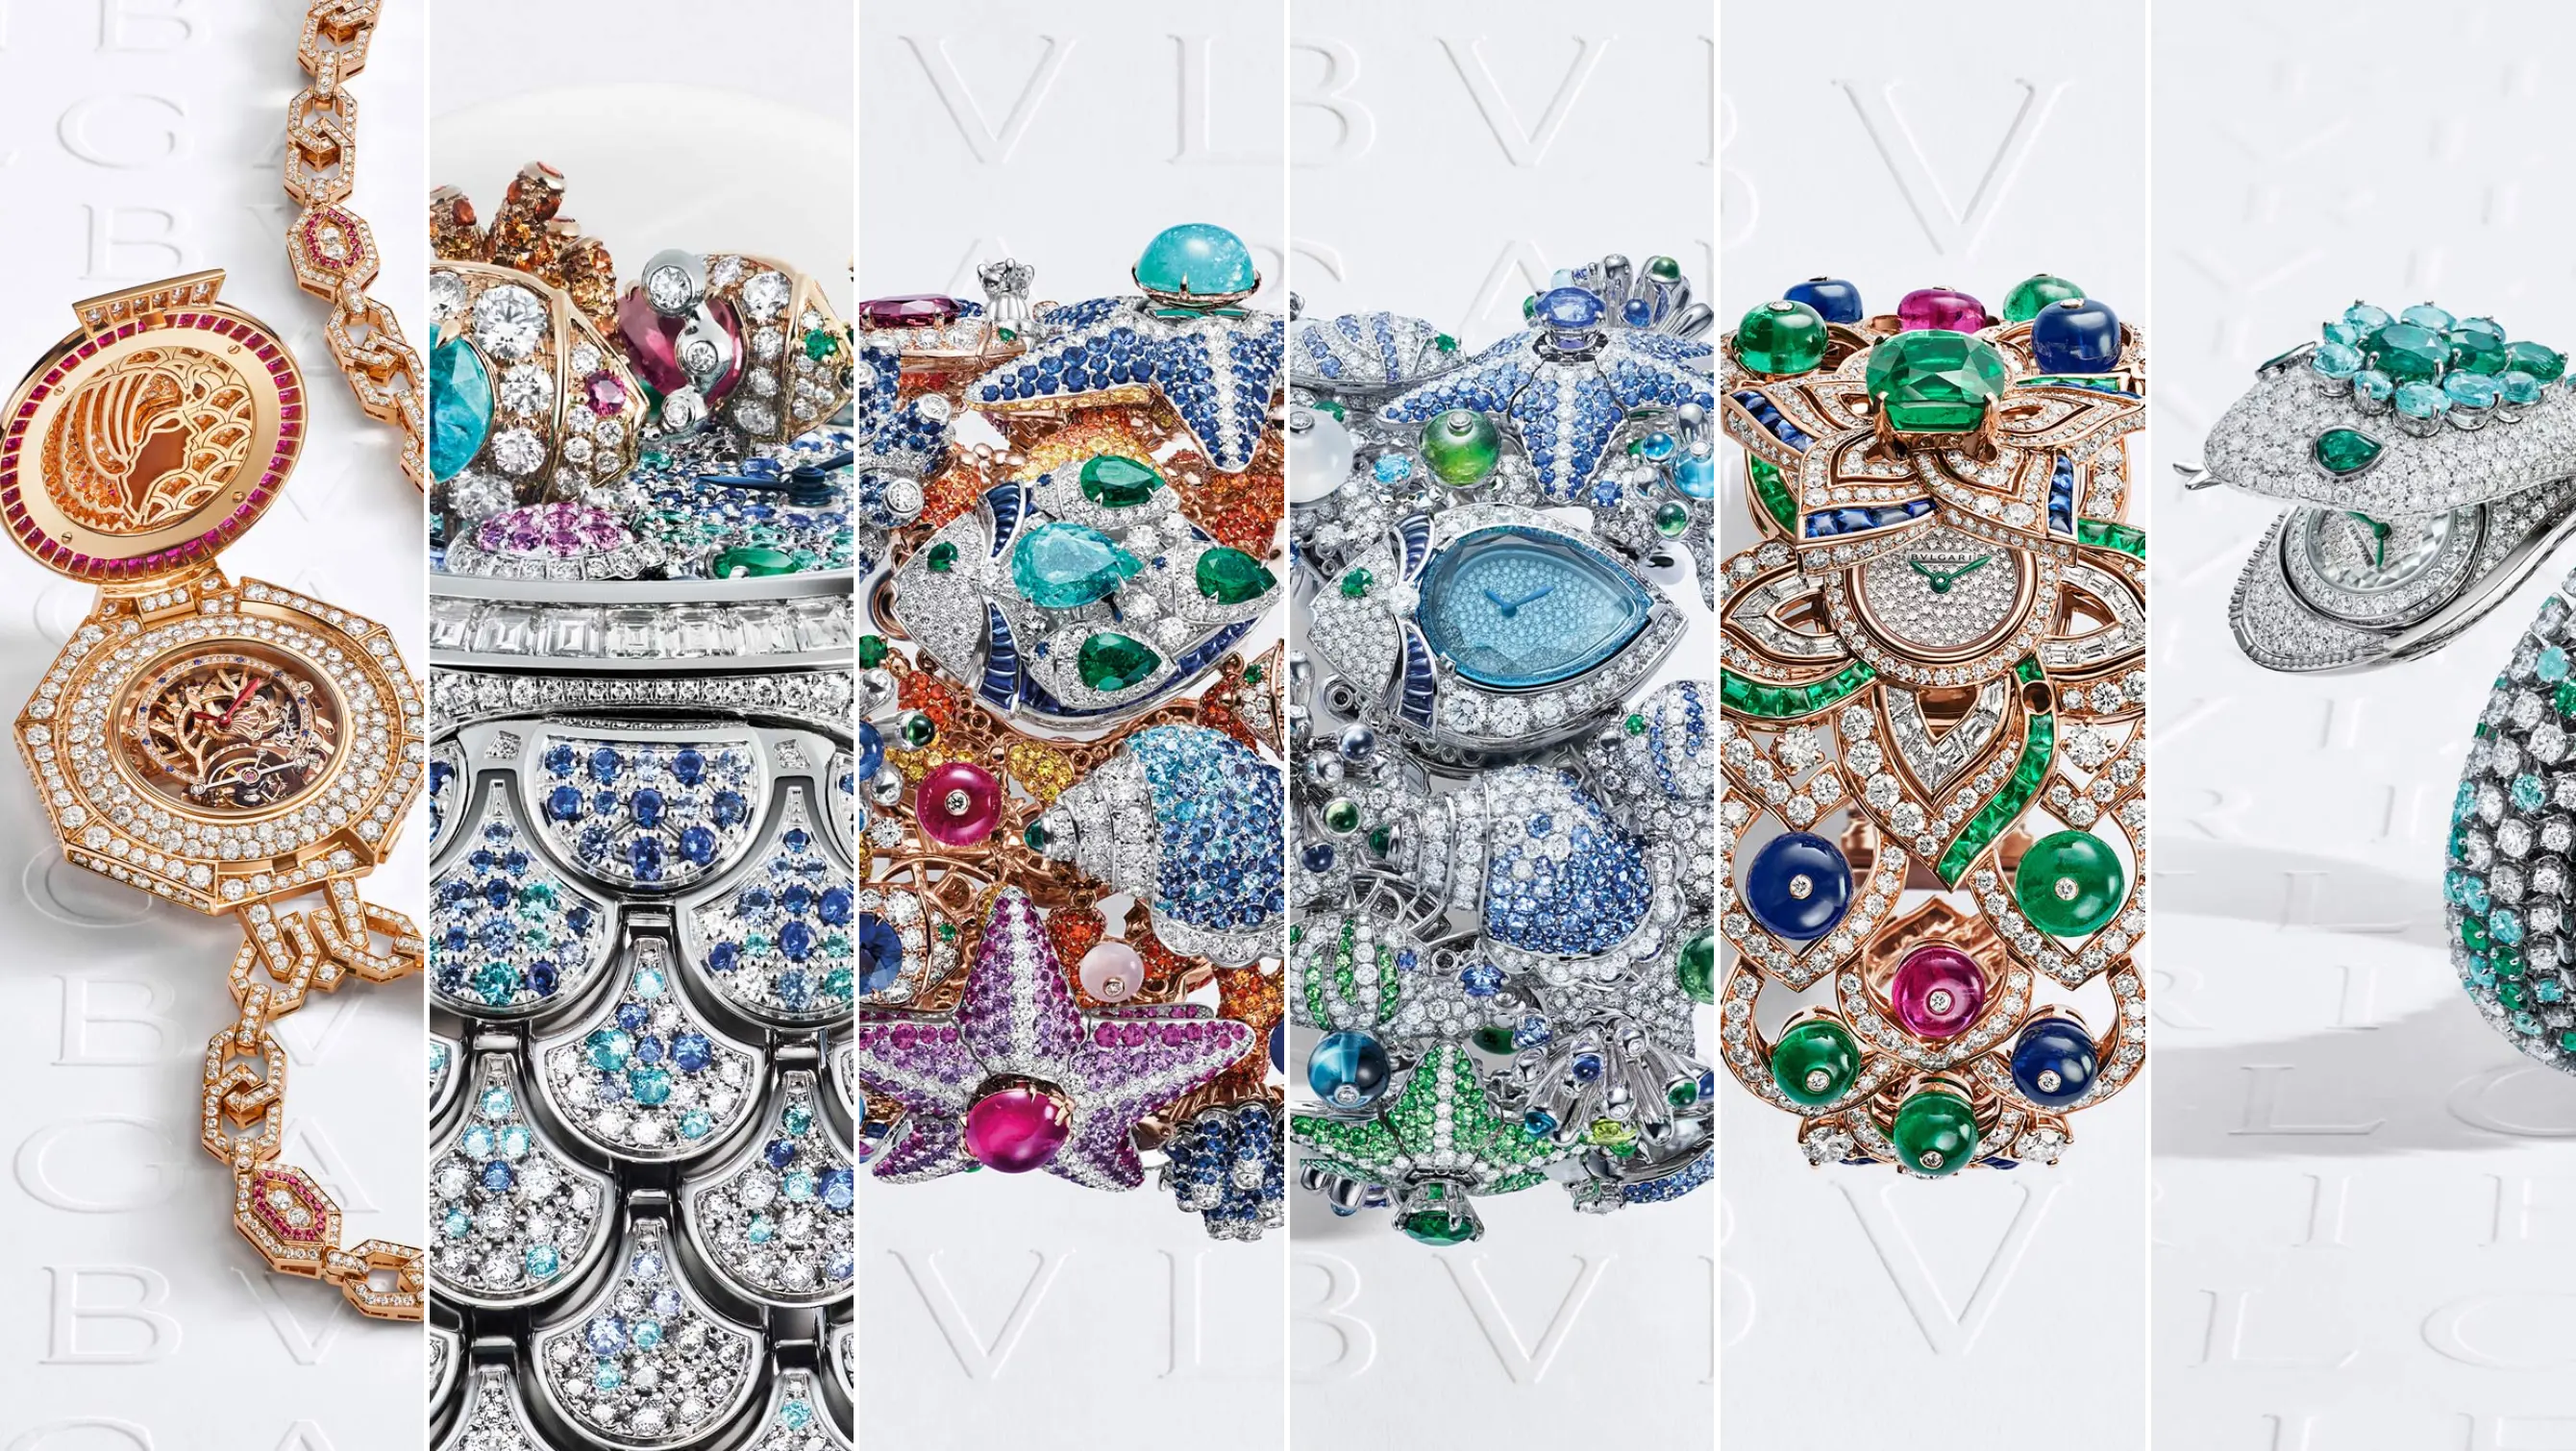 Bulgari’s high jewellery watches take inspiration from Mediterranean flora and fauna